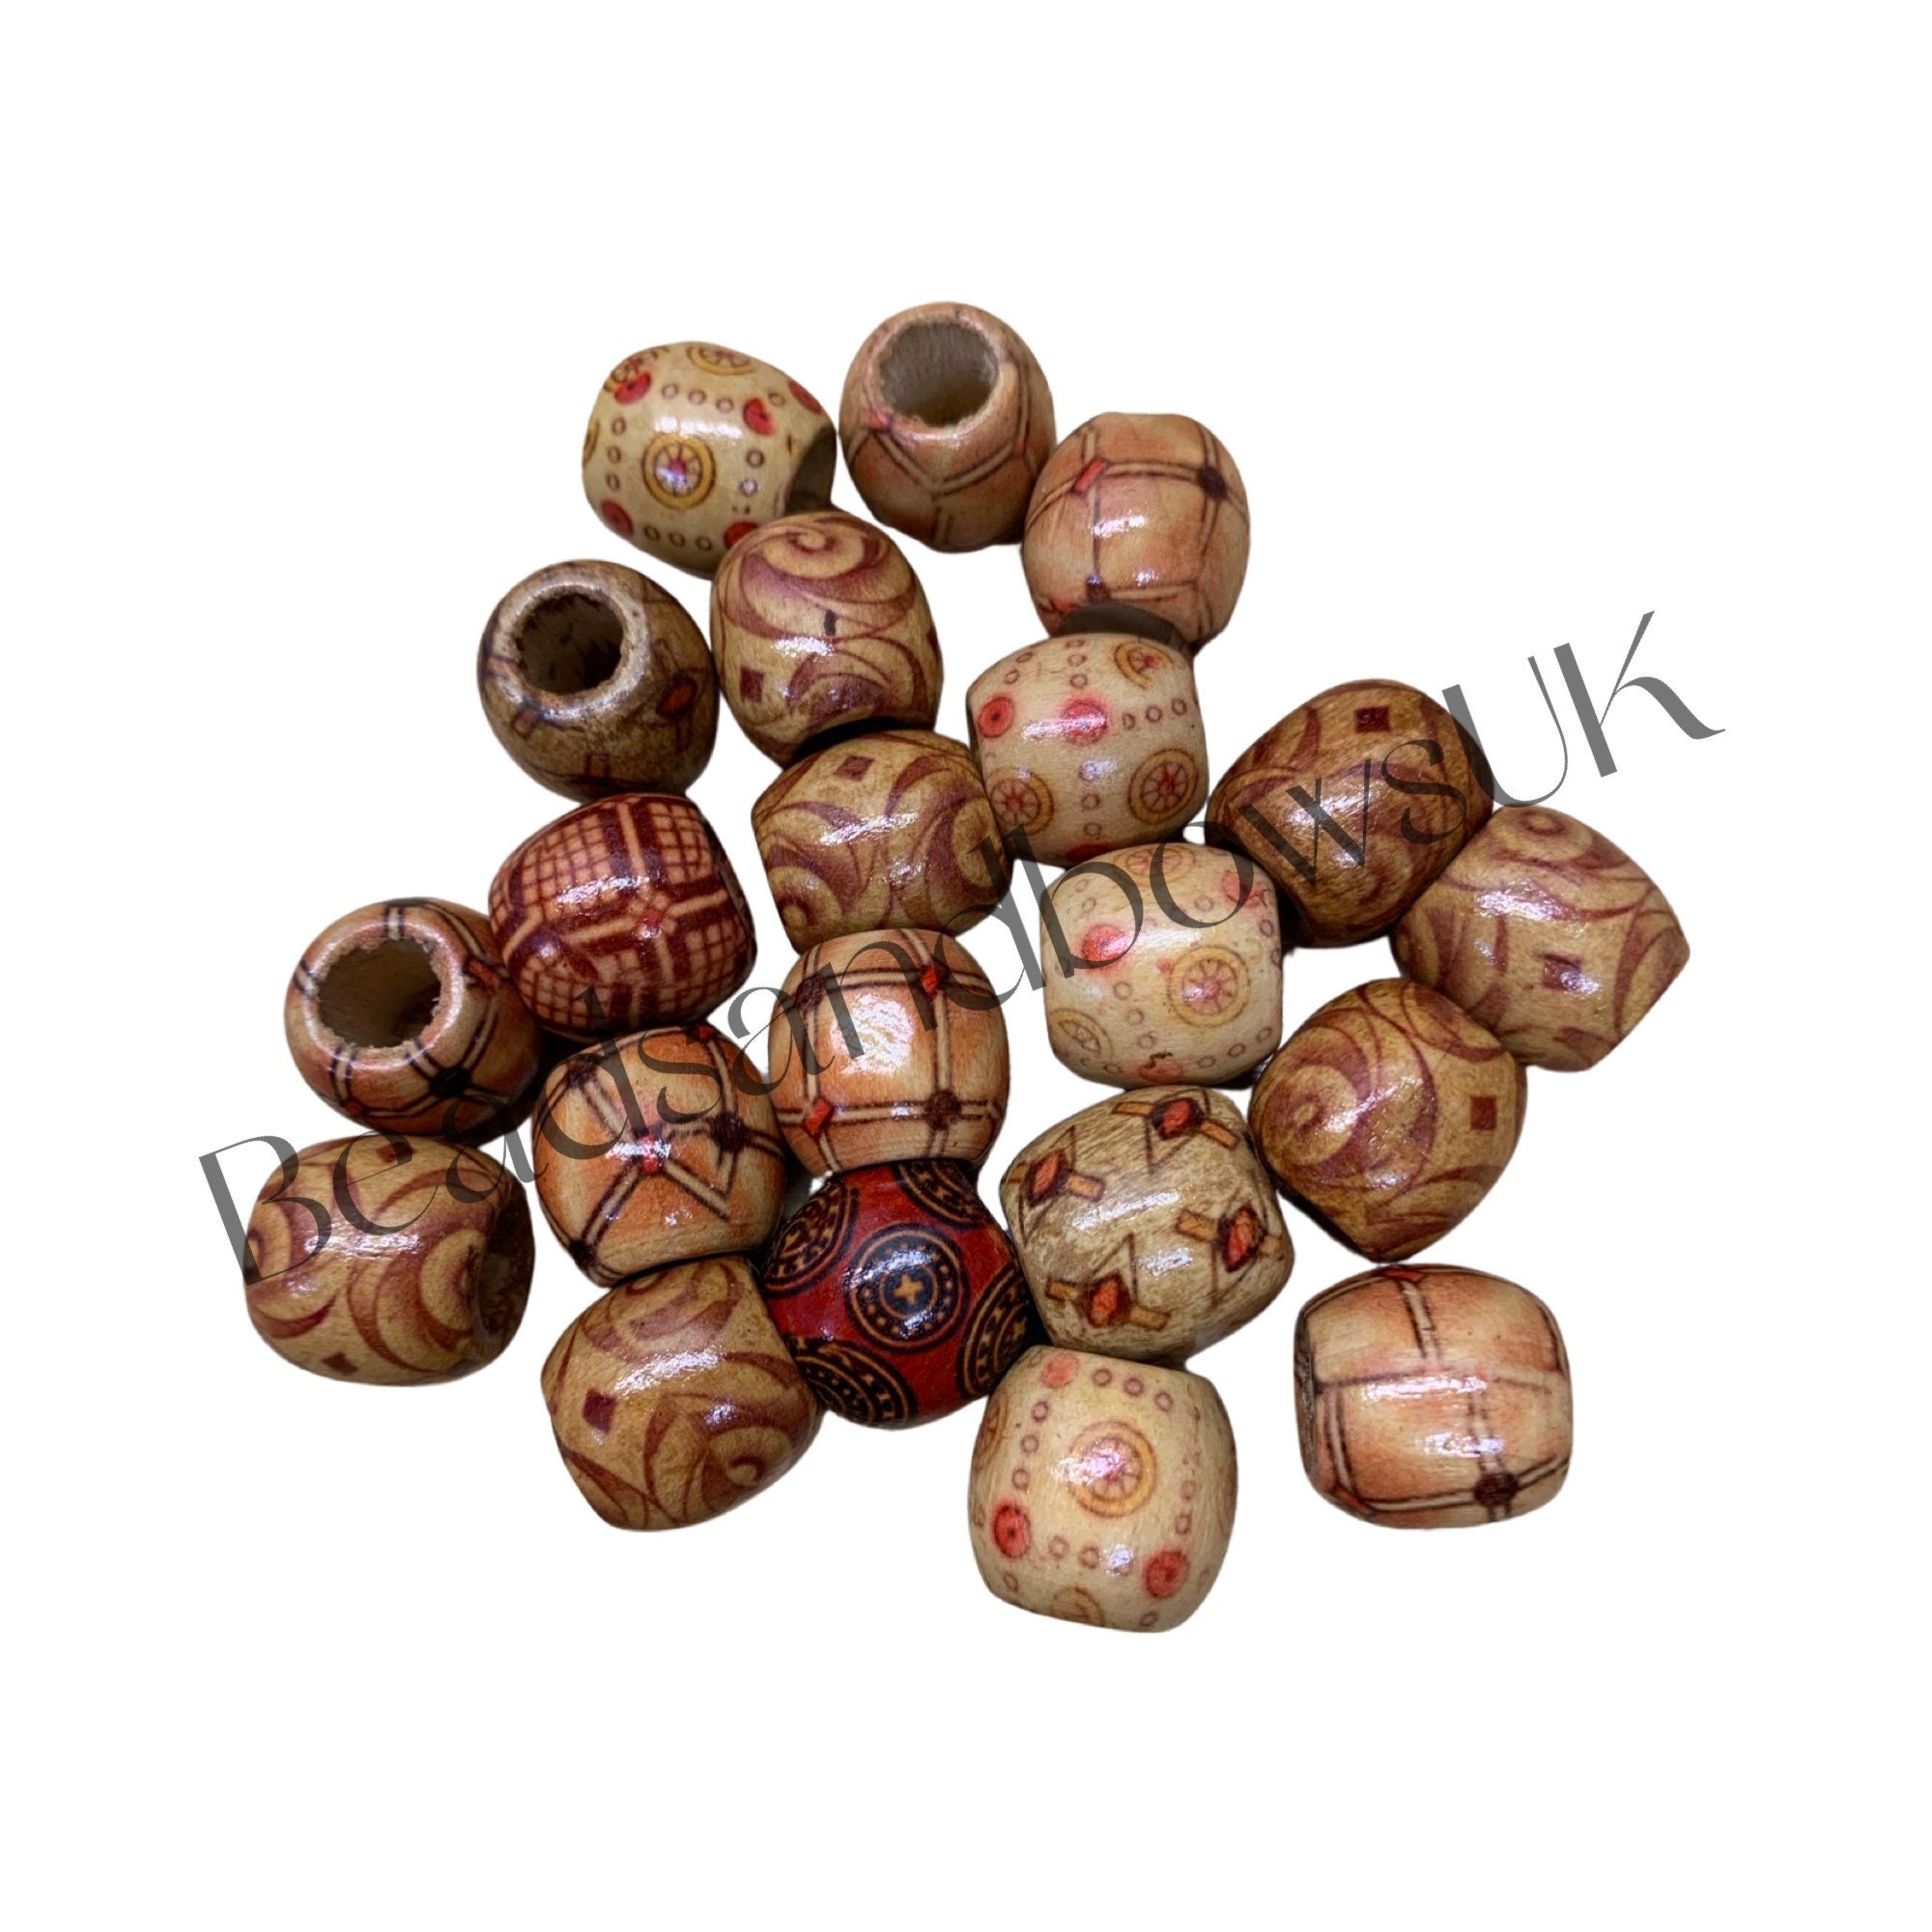 200 Macrame Beads in Mixed Patterns 17mm x 16mm with 7.4mm Large Hole  Wooden Beads